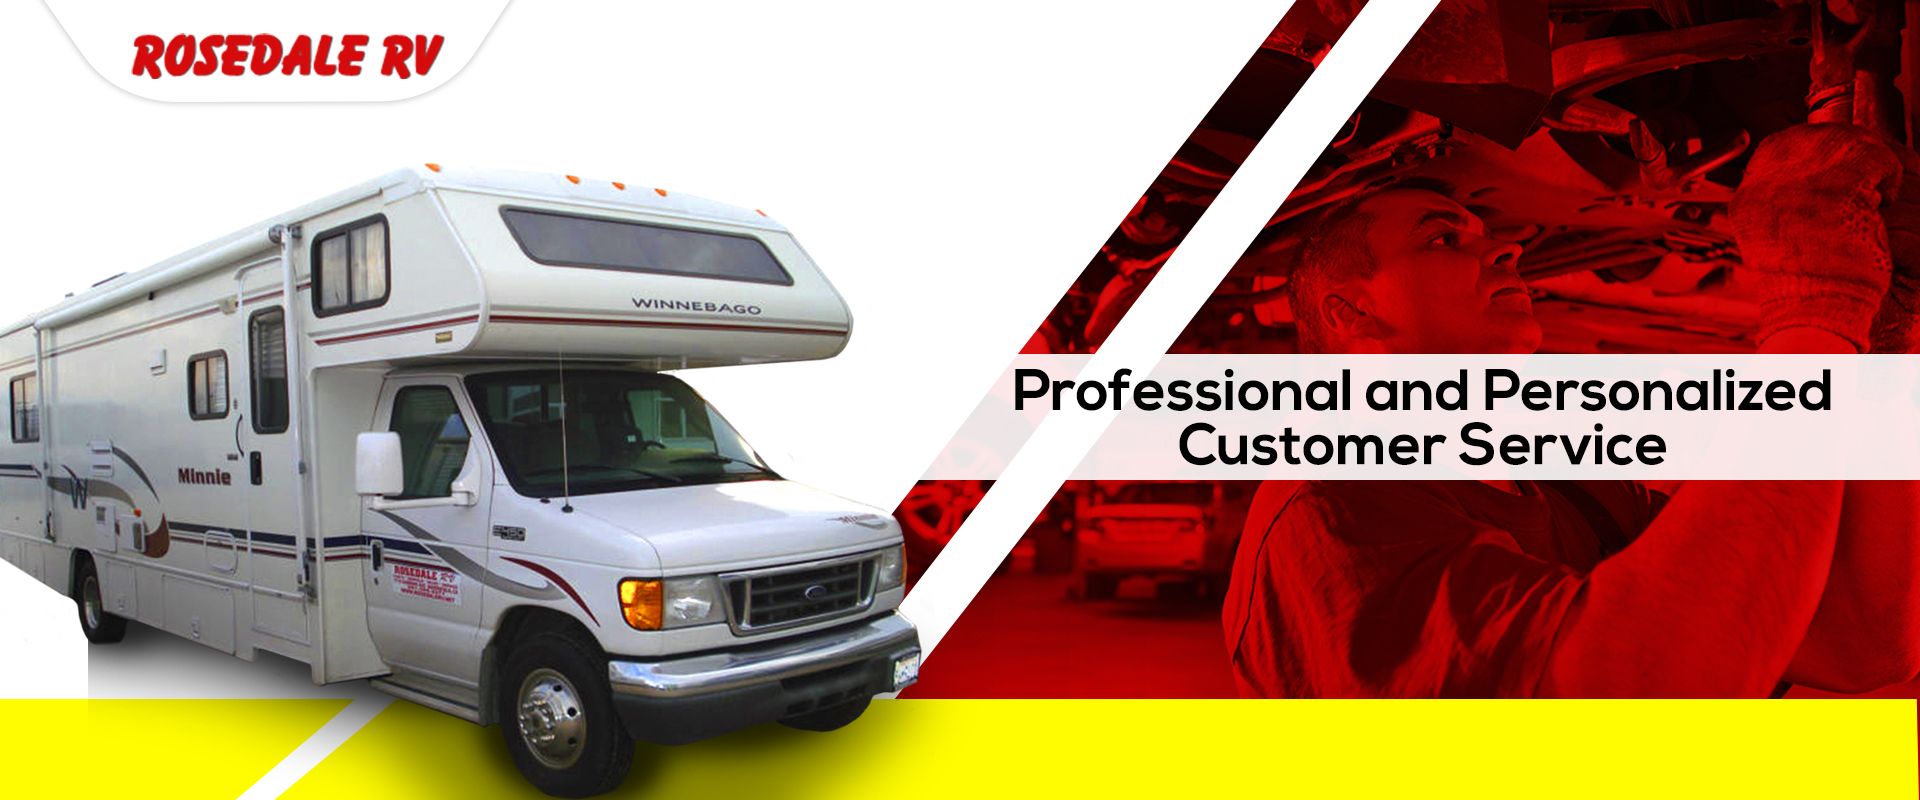 professional and personalized customer services